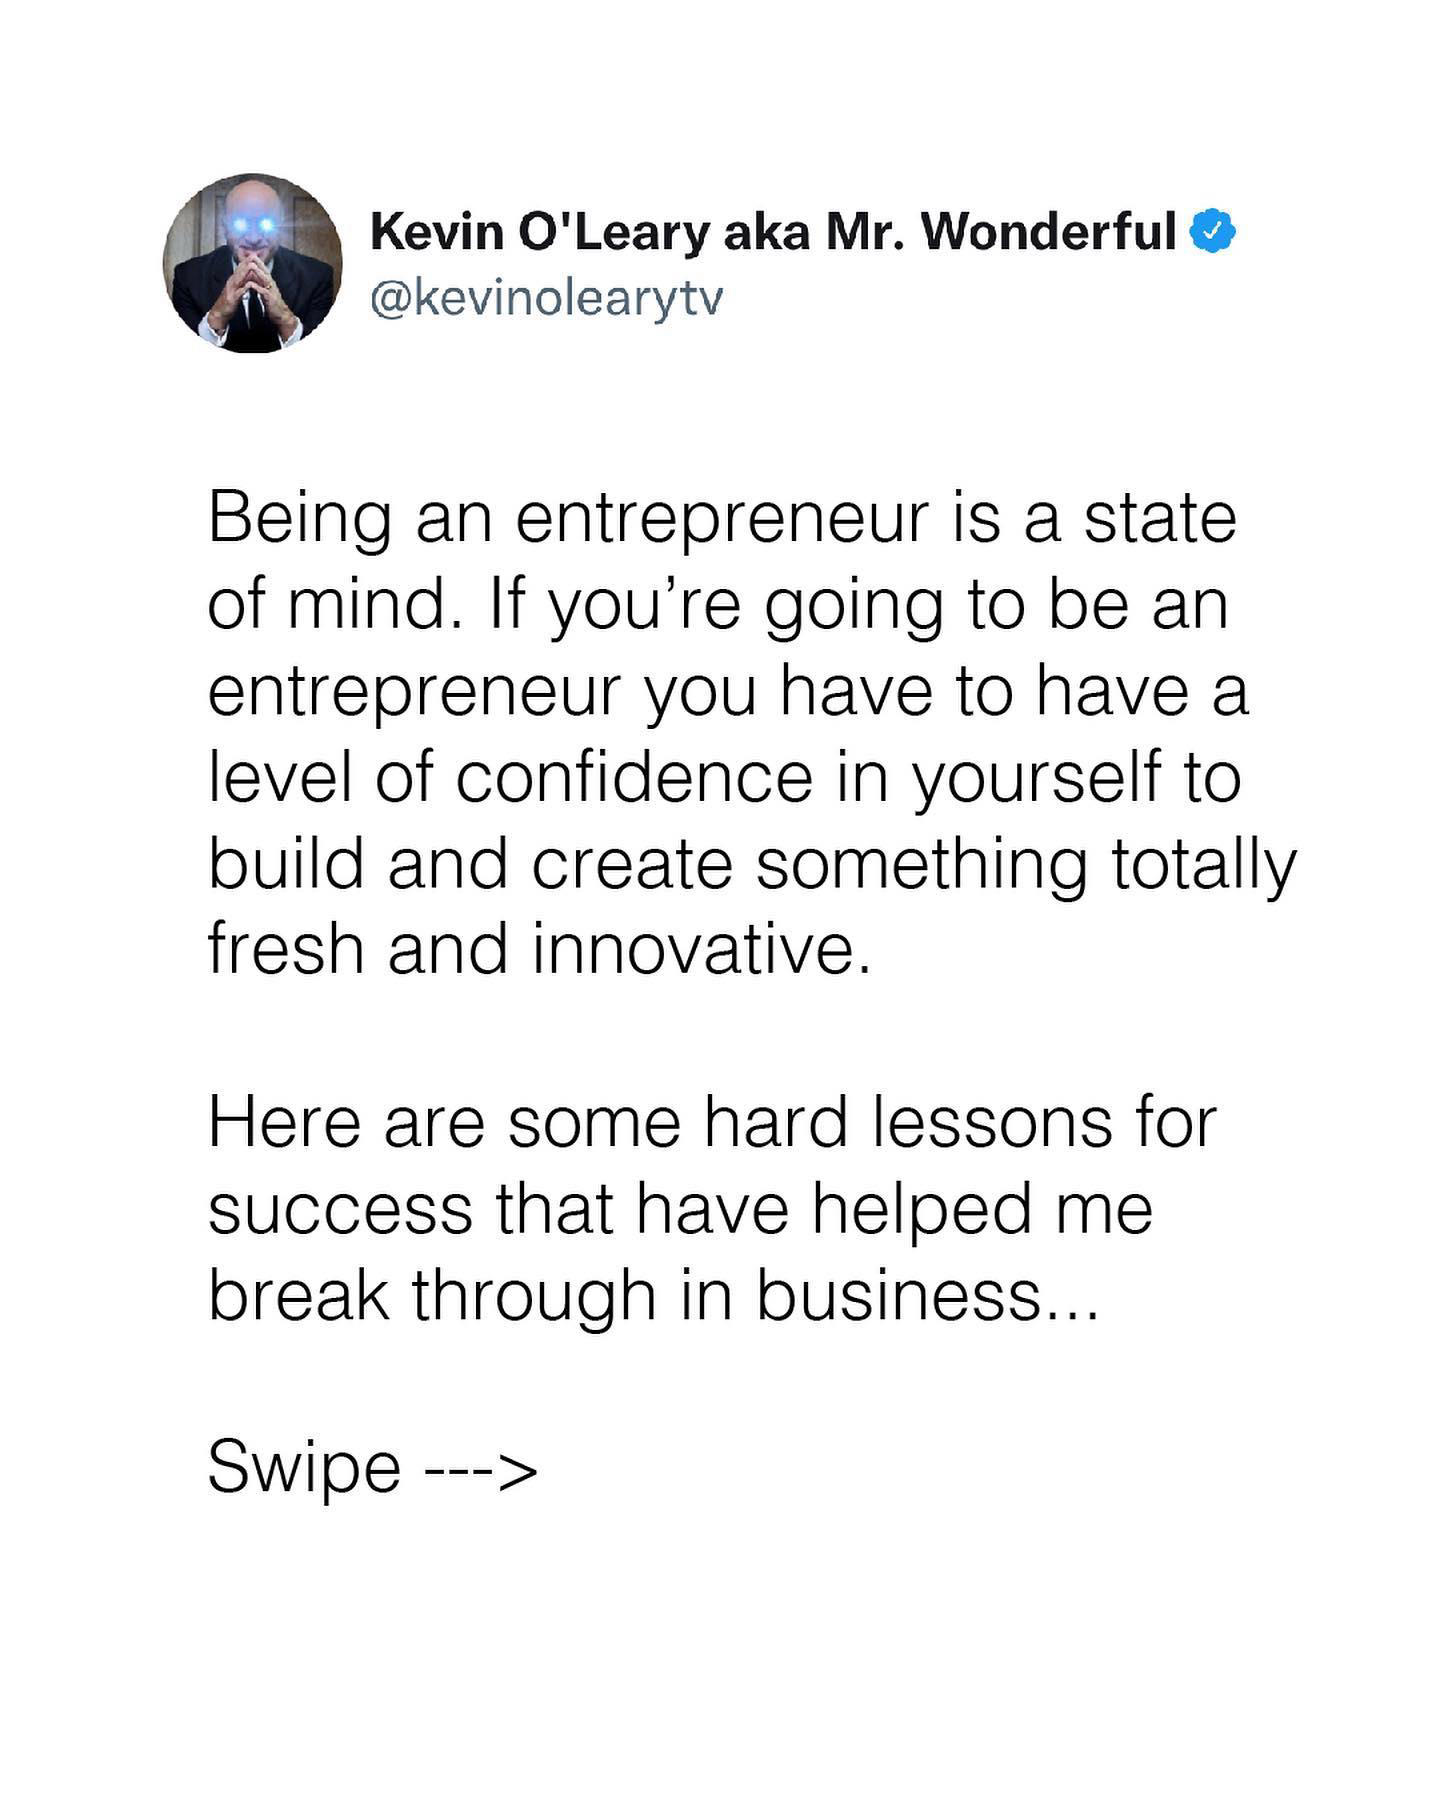 Kevin O'Leary - I actually think being an entrepreneur is a state of mind